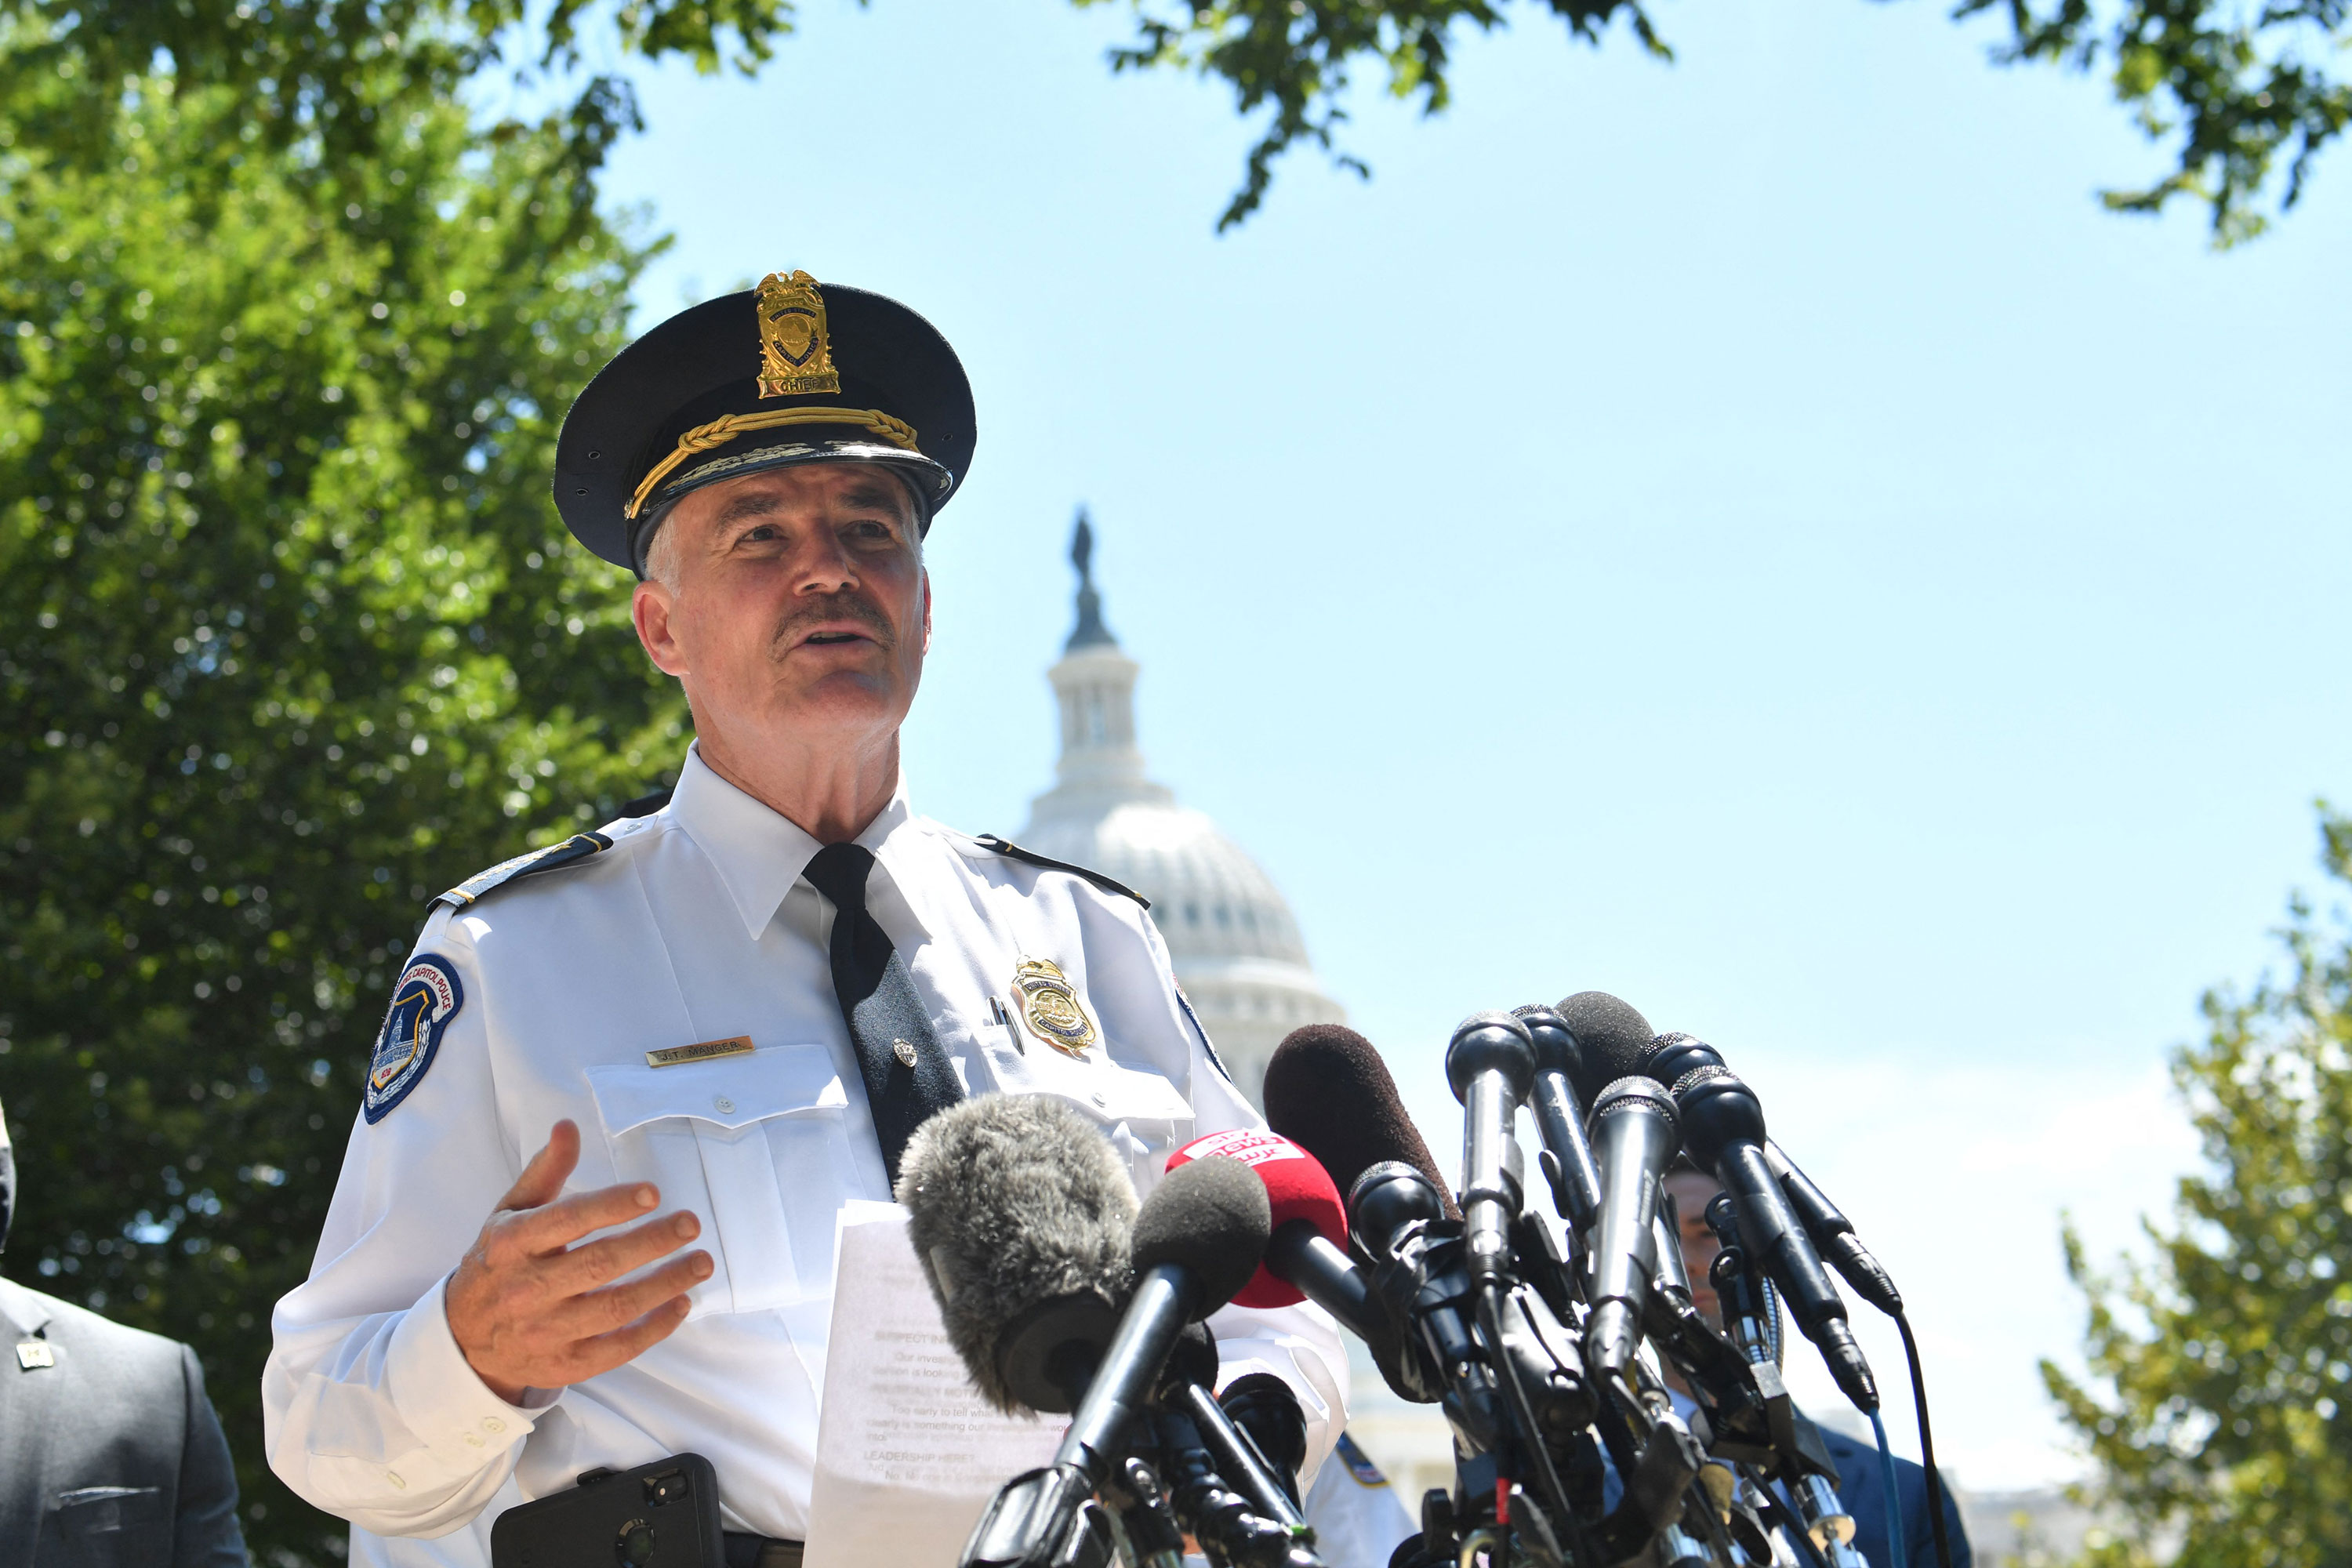 US Capitol Police Chief J. Thomas Manger speaks to the press near the Capitol on August 19.